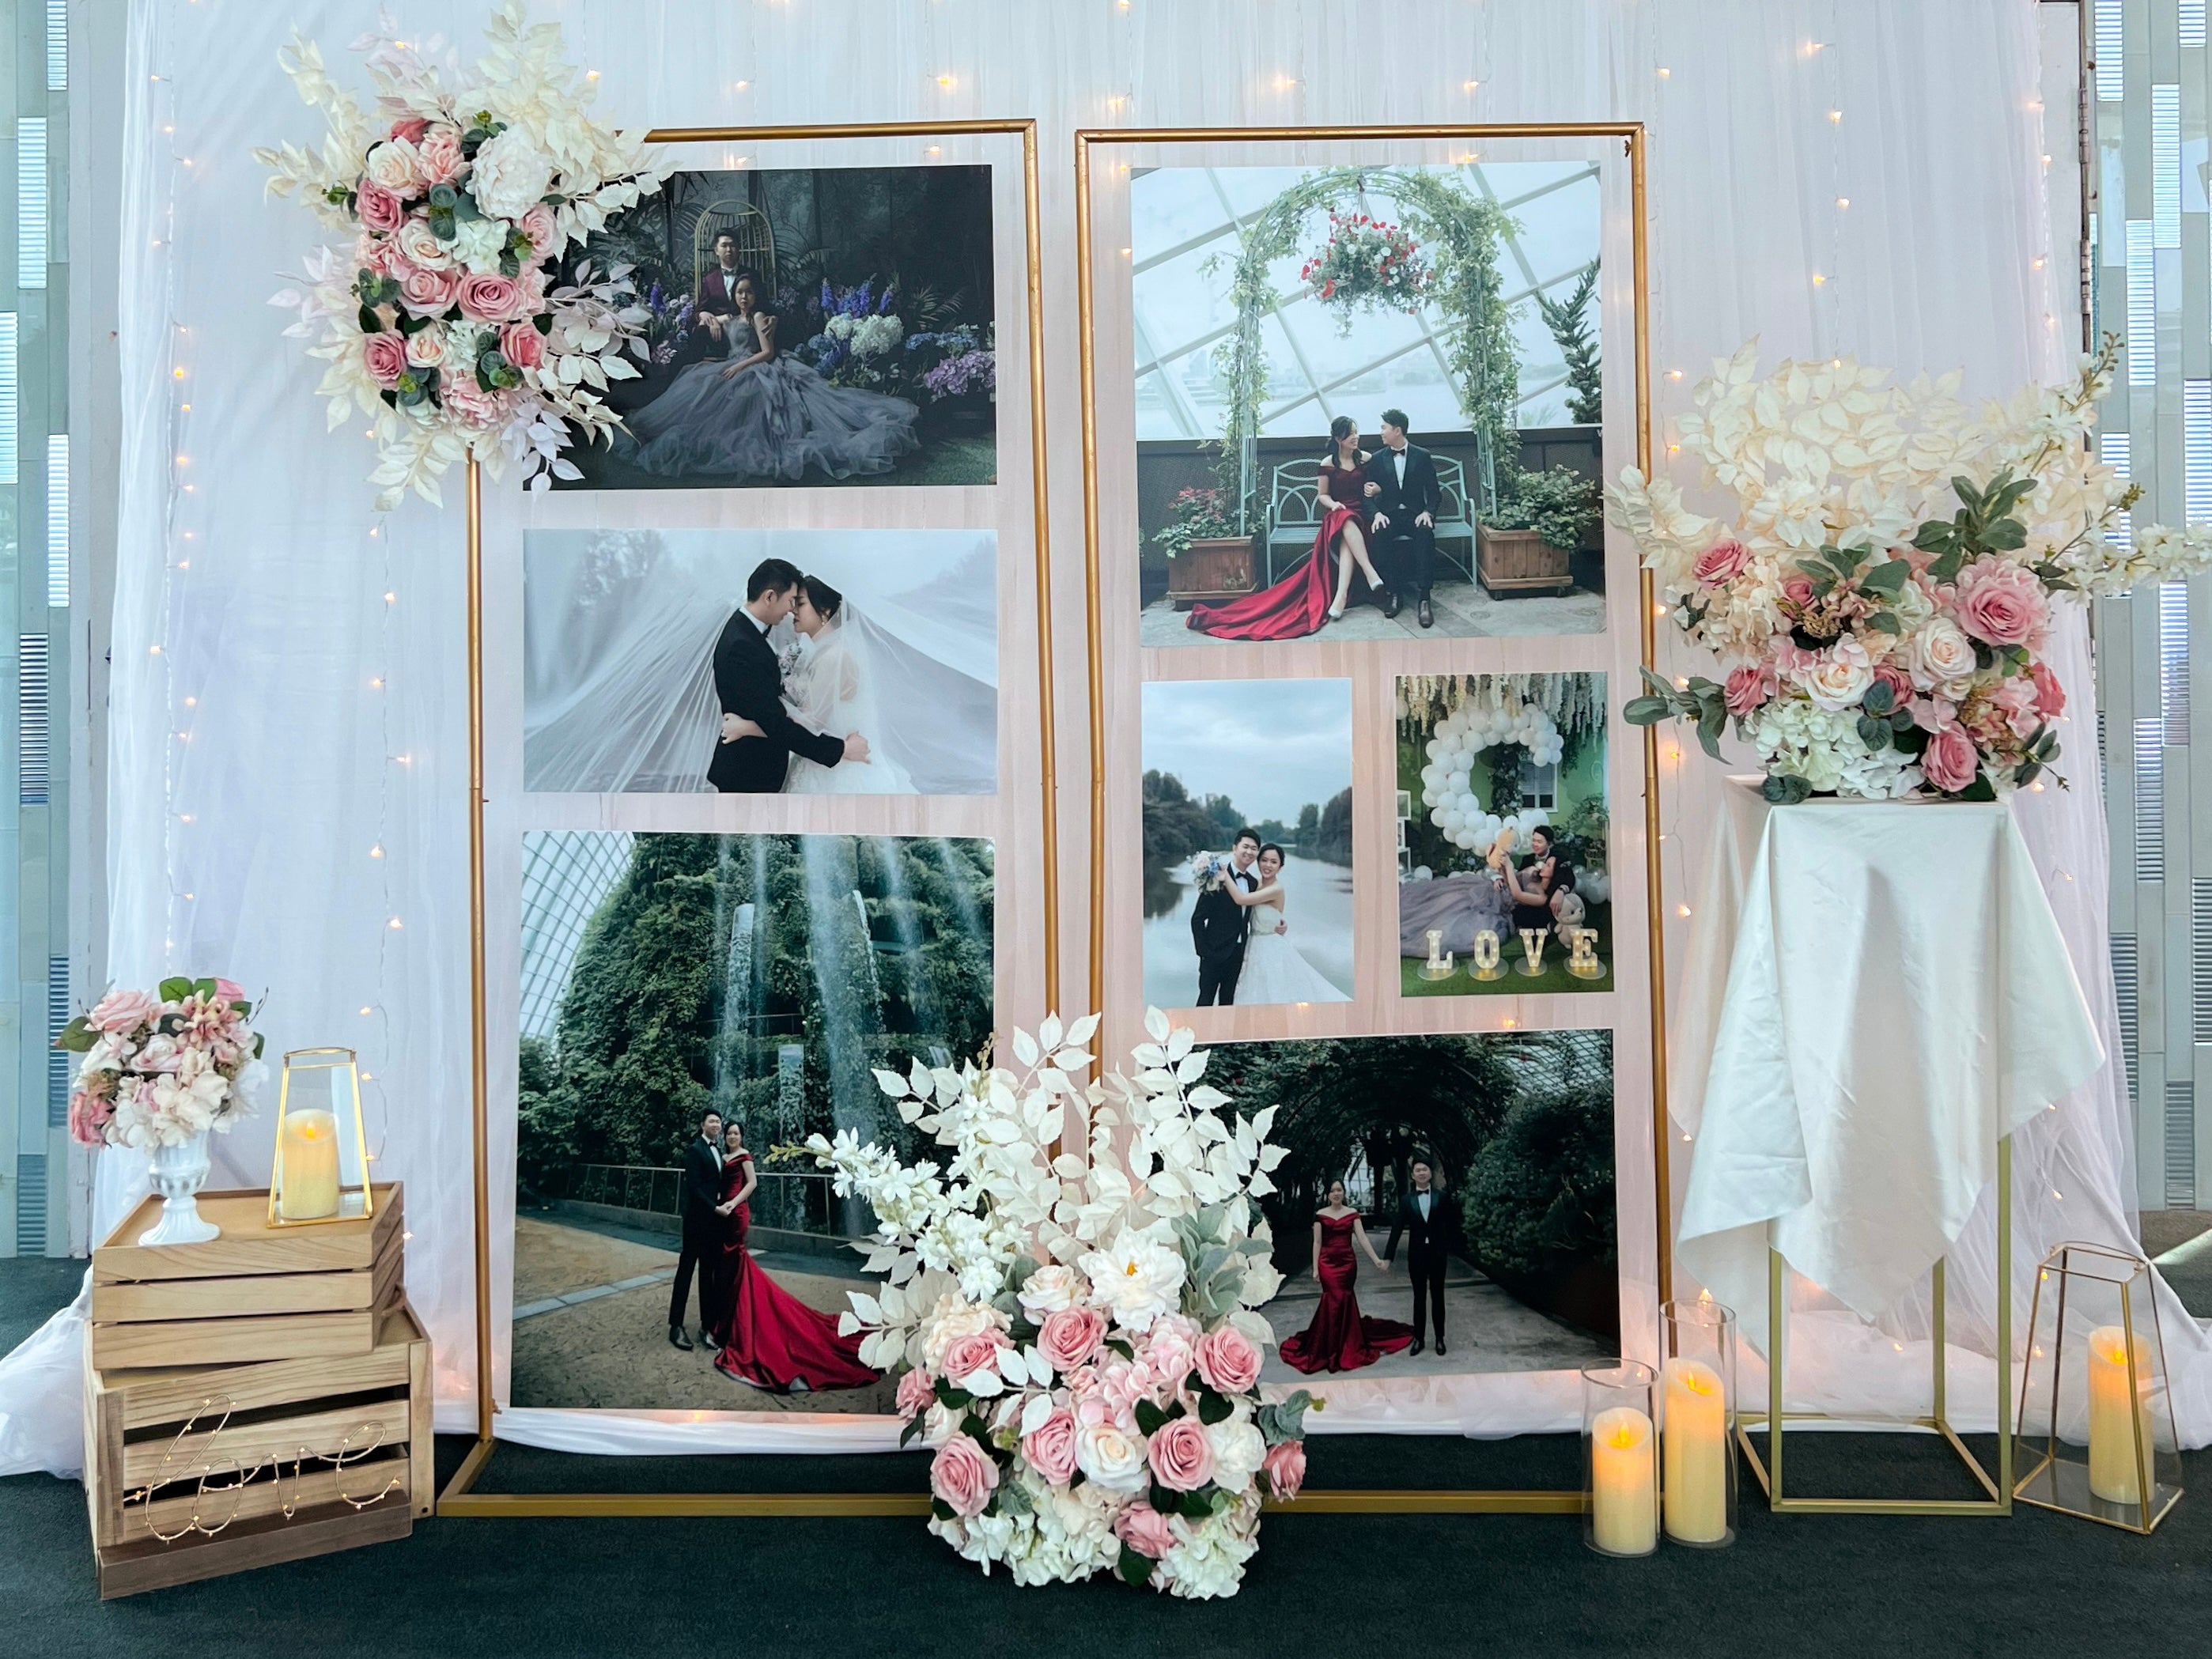 Wedding Reception Decor in Singapore - Multi-stands Photo Gallery with Pink & White Florals (Venue: ONE°15 Marina Sentosa Cove)